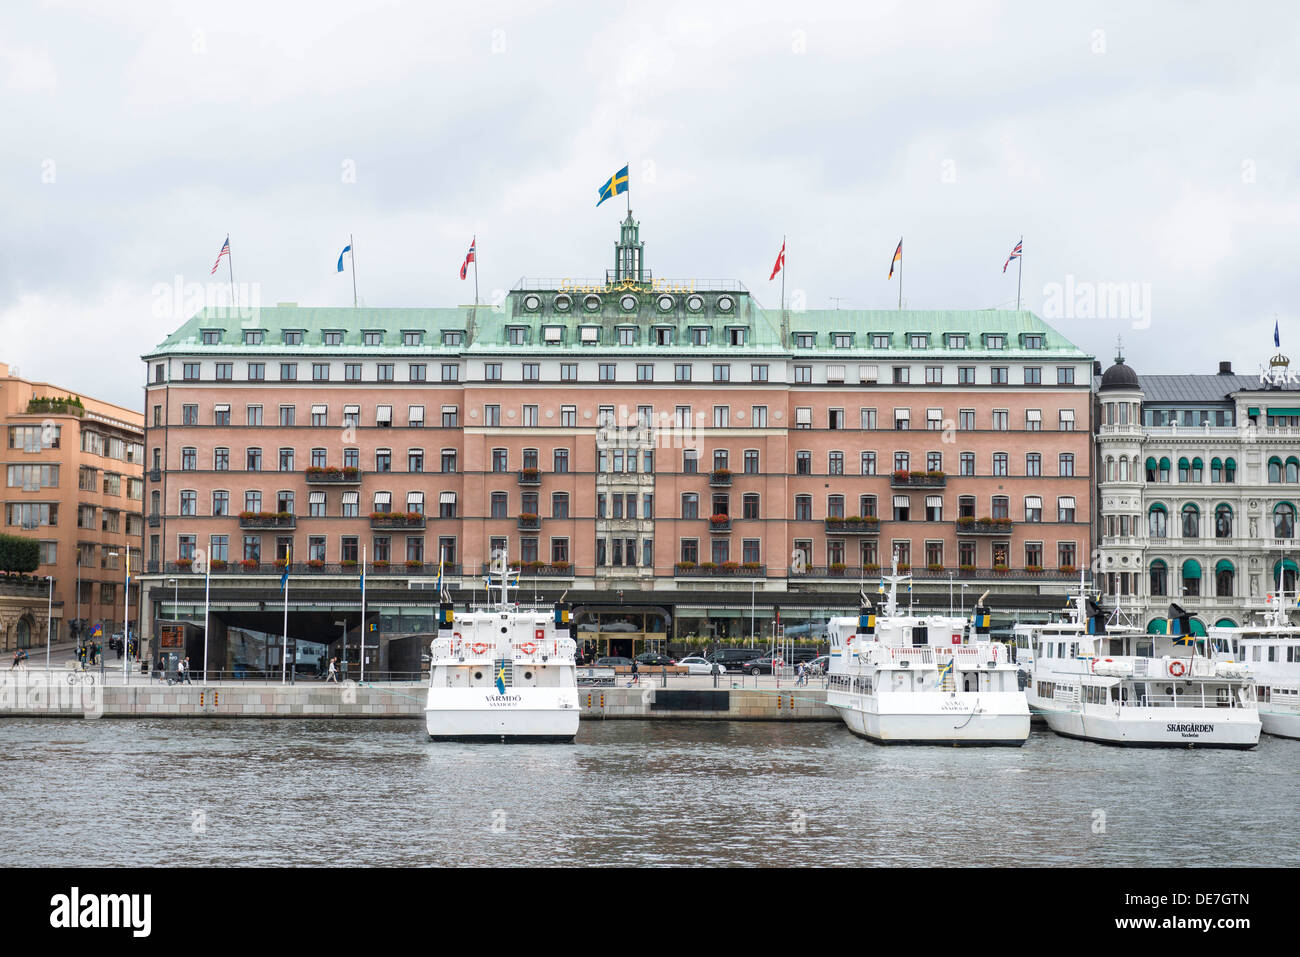 Grand Hotel and ships in Stockholm Stock Photo